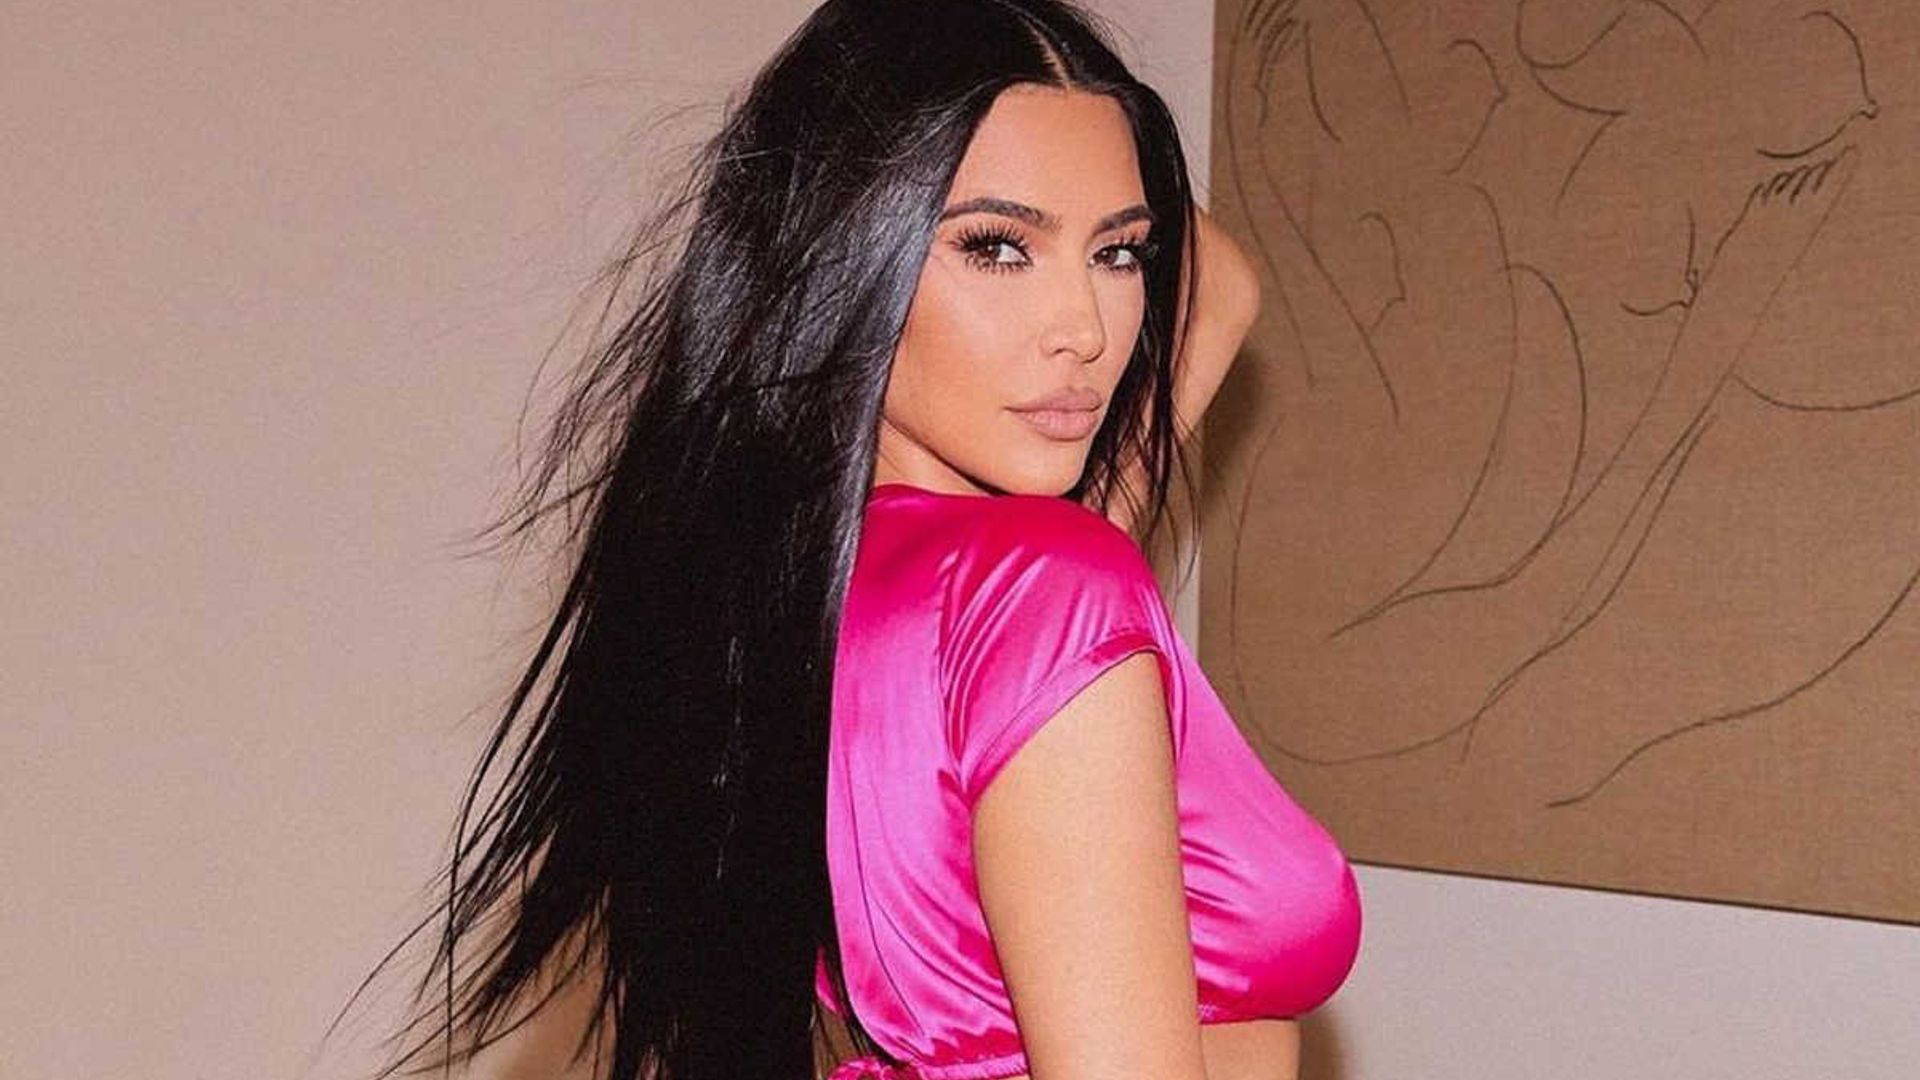 Kim Kardashian is ready for Valentine's Day with a sexy new look